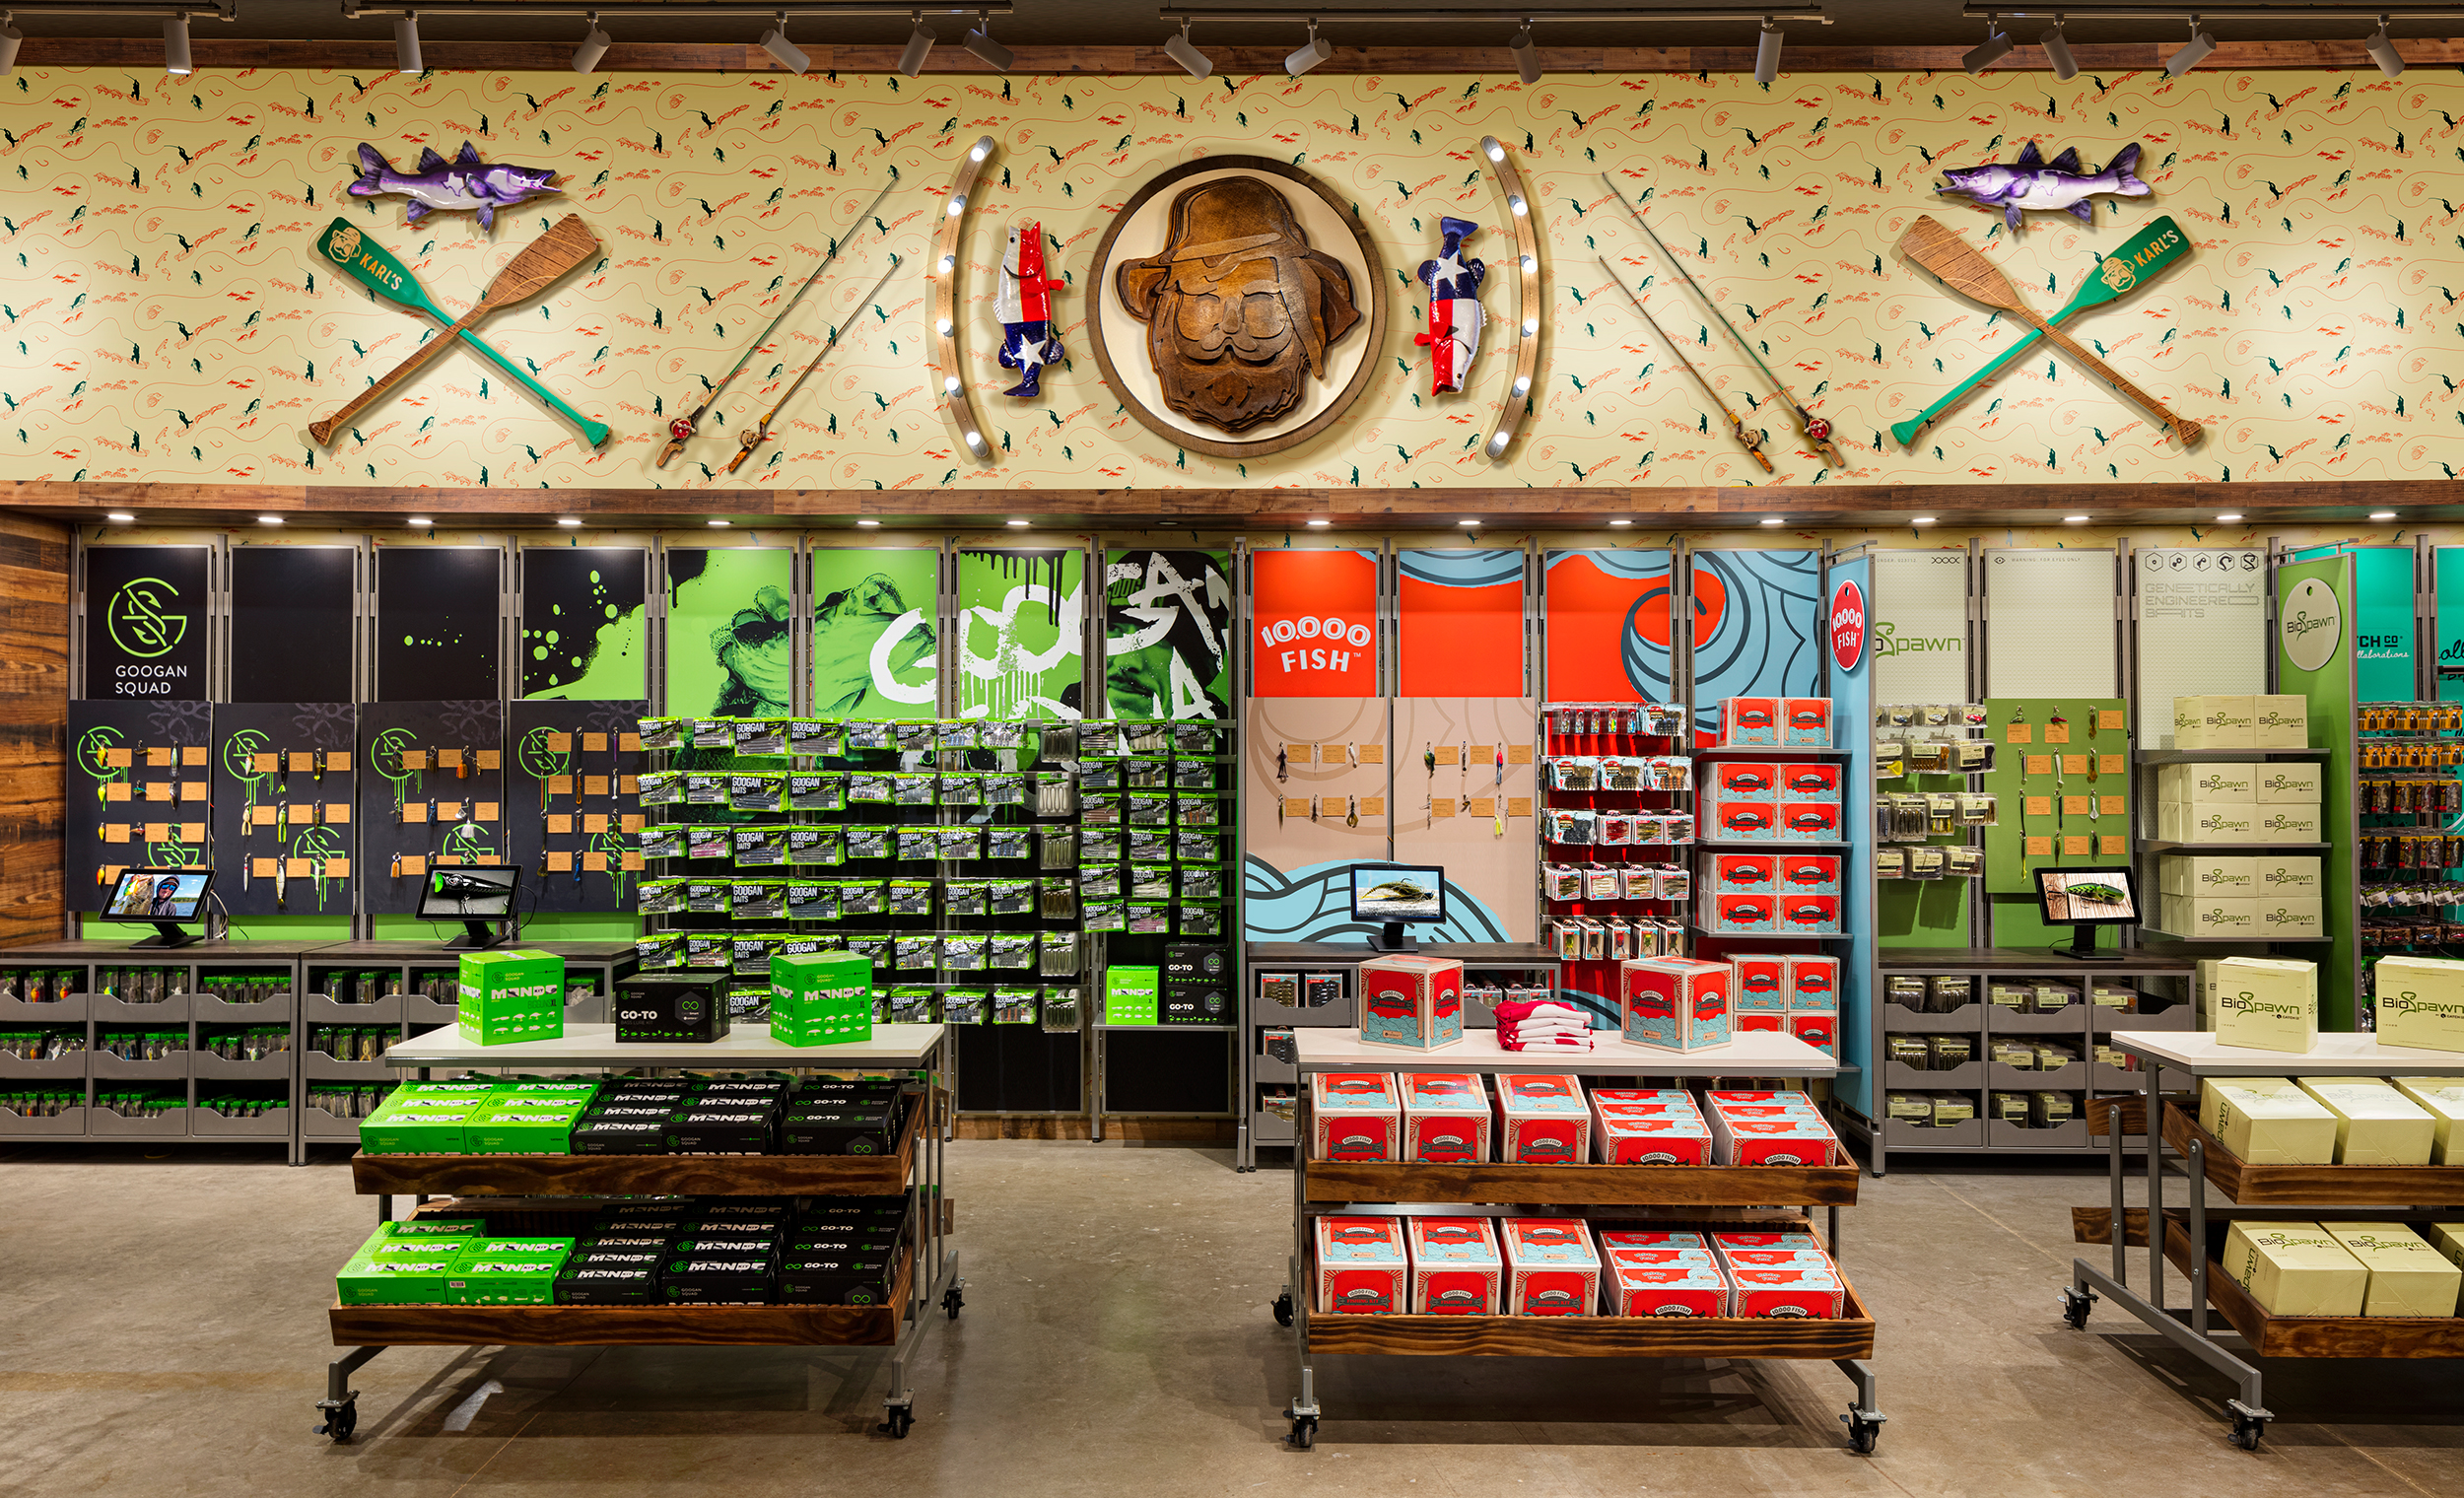 The visual merchandising strategy is meant to allow customers to “choose their own adventure” as they browse the space. Fixtures and messaging work together to guide novices through the store.